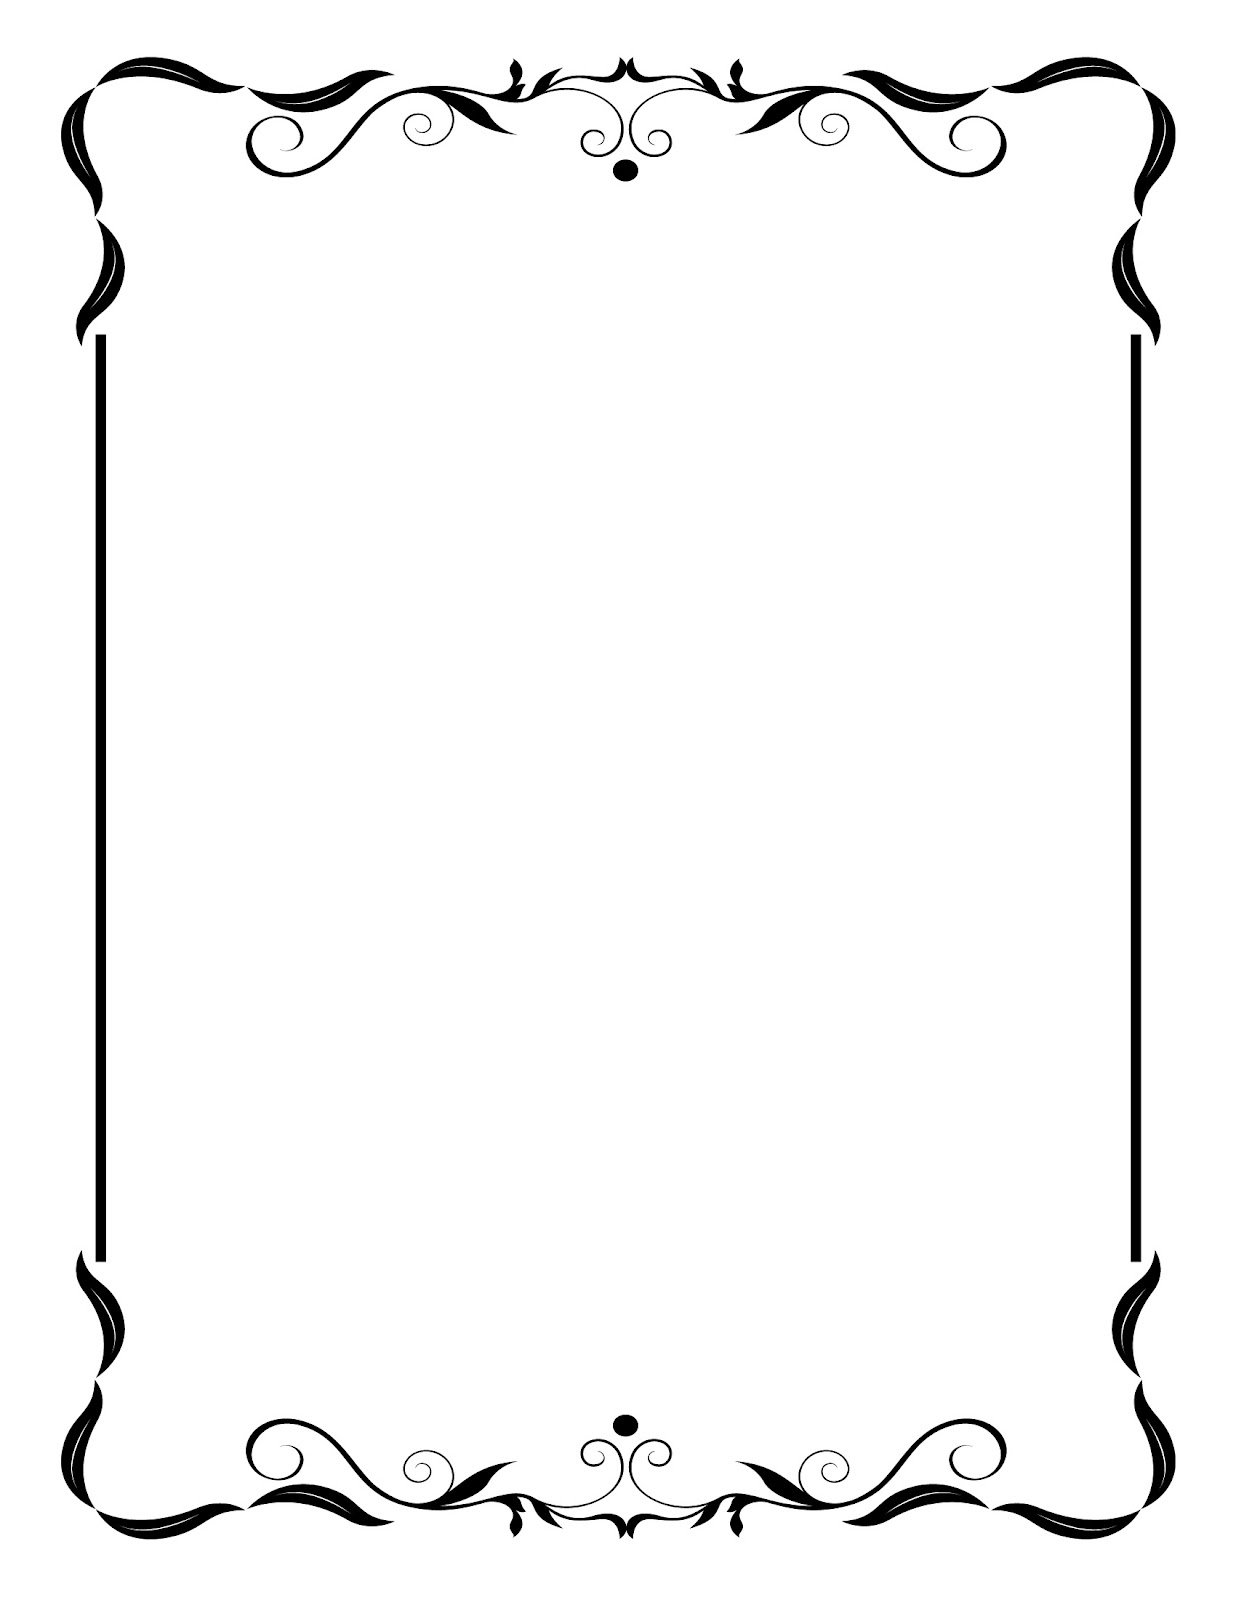 Frame clipart free free clipart images 2